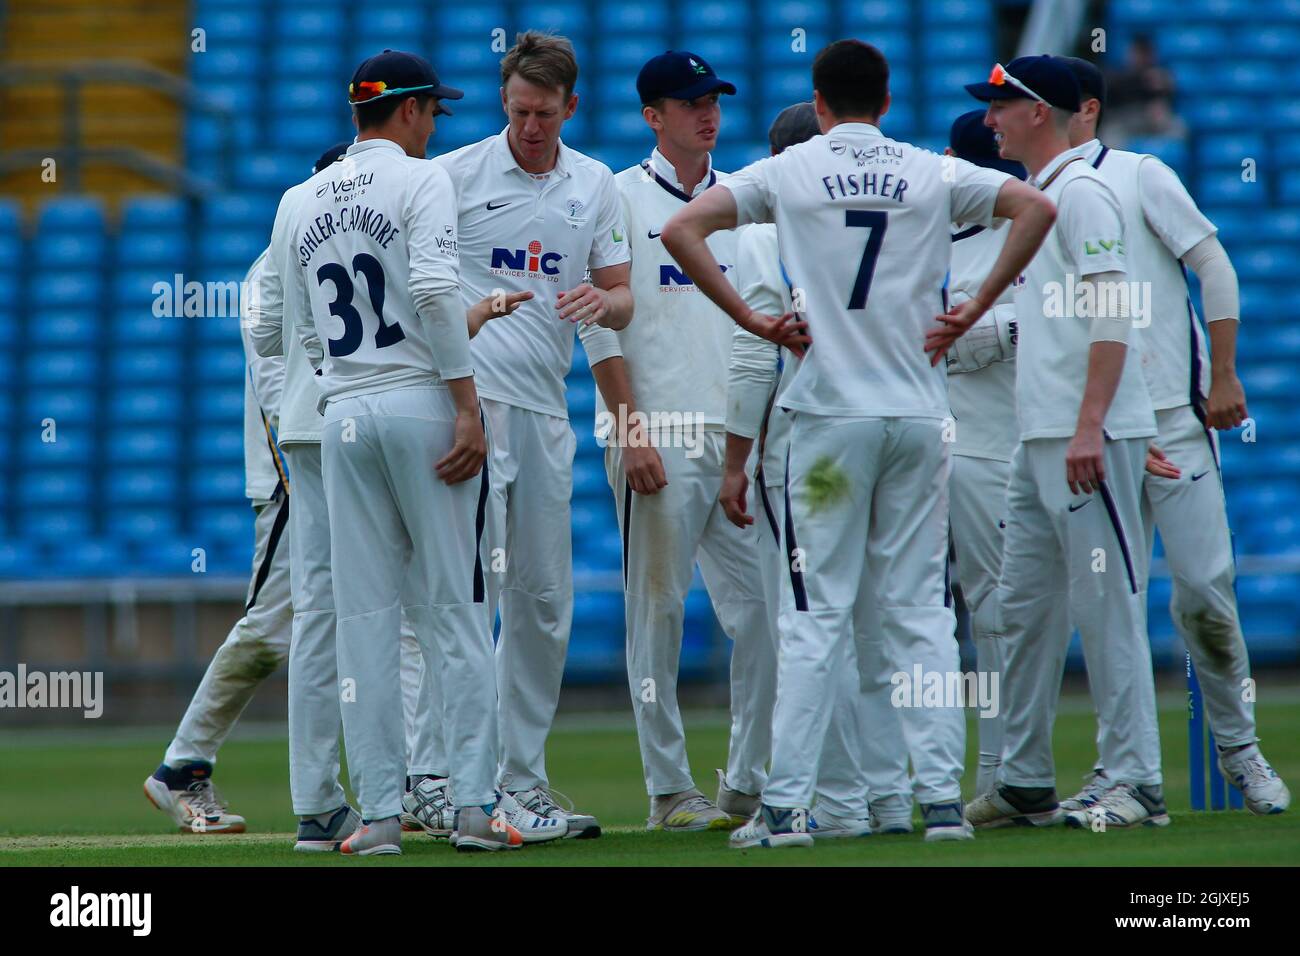 Leeds, UK. 12th Sep, 2021. Yorkshire County Cricket, Emerald Headingley Stadium, Leeds, West Yorkshire, 12th September 2021. LV= Insurance County ChampionshipÕs Division One - Yorkshire County Cricket Club vs Warwickshire CCC Day 1. Steven Patterson of Yorkshire County Cricket Club celebrates taking the wicket of Jacob Bethell of Warwickshire County Cricket Club, Credit: Touchlinepics/Alamy Live News Stock Photo